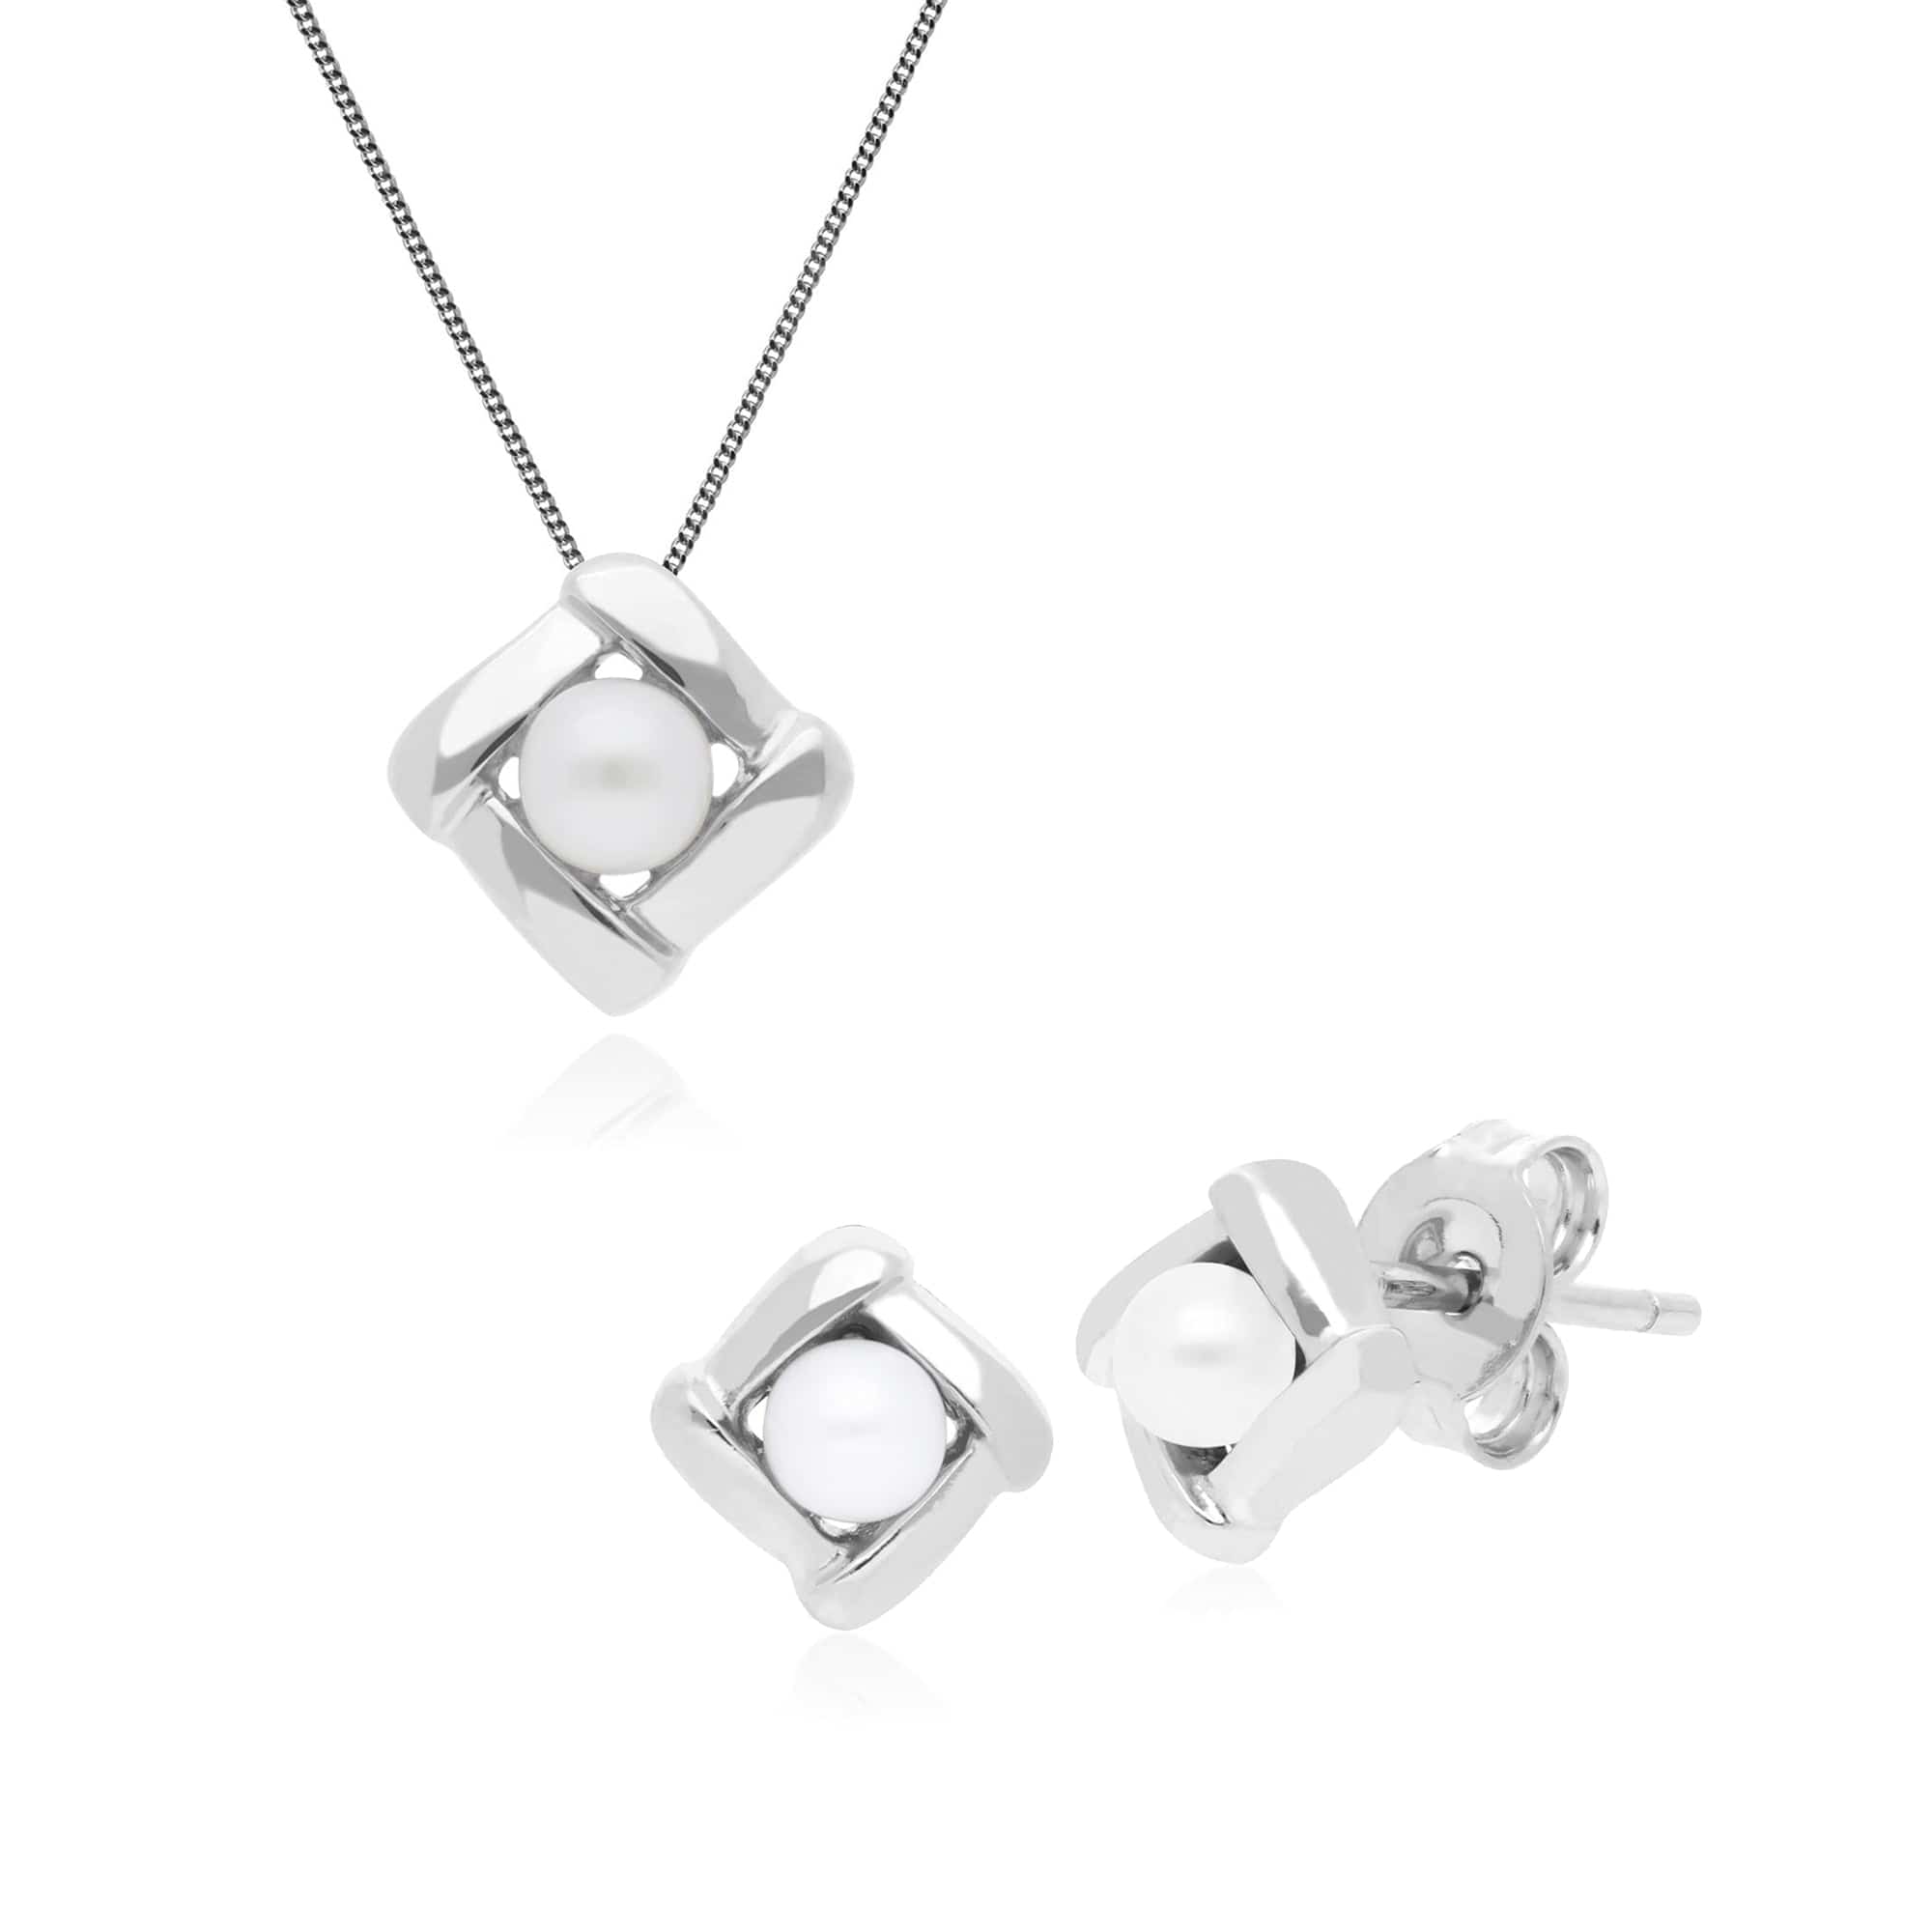 253E222101925-253P246001925 Essential Round Pearl Square Crossover Stud Earrings & Pendant Set in 925 Sterling Silver 1